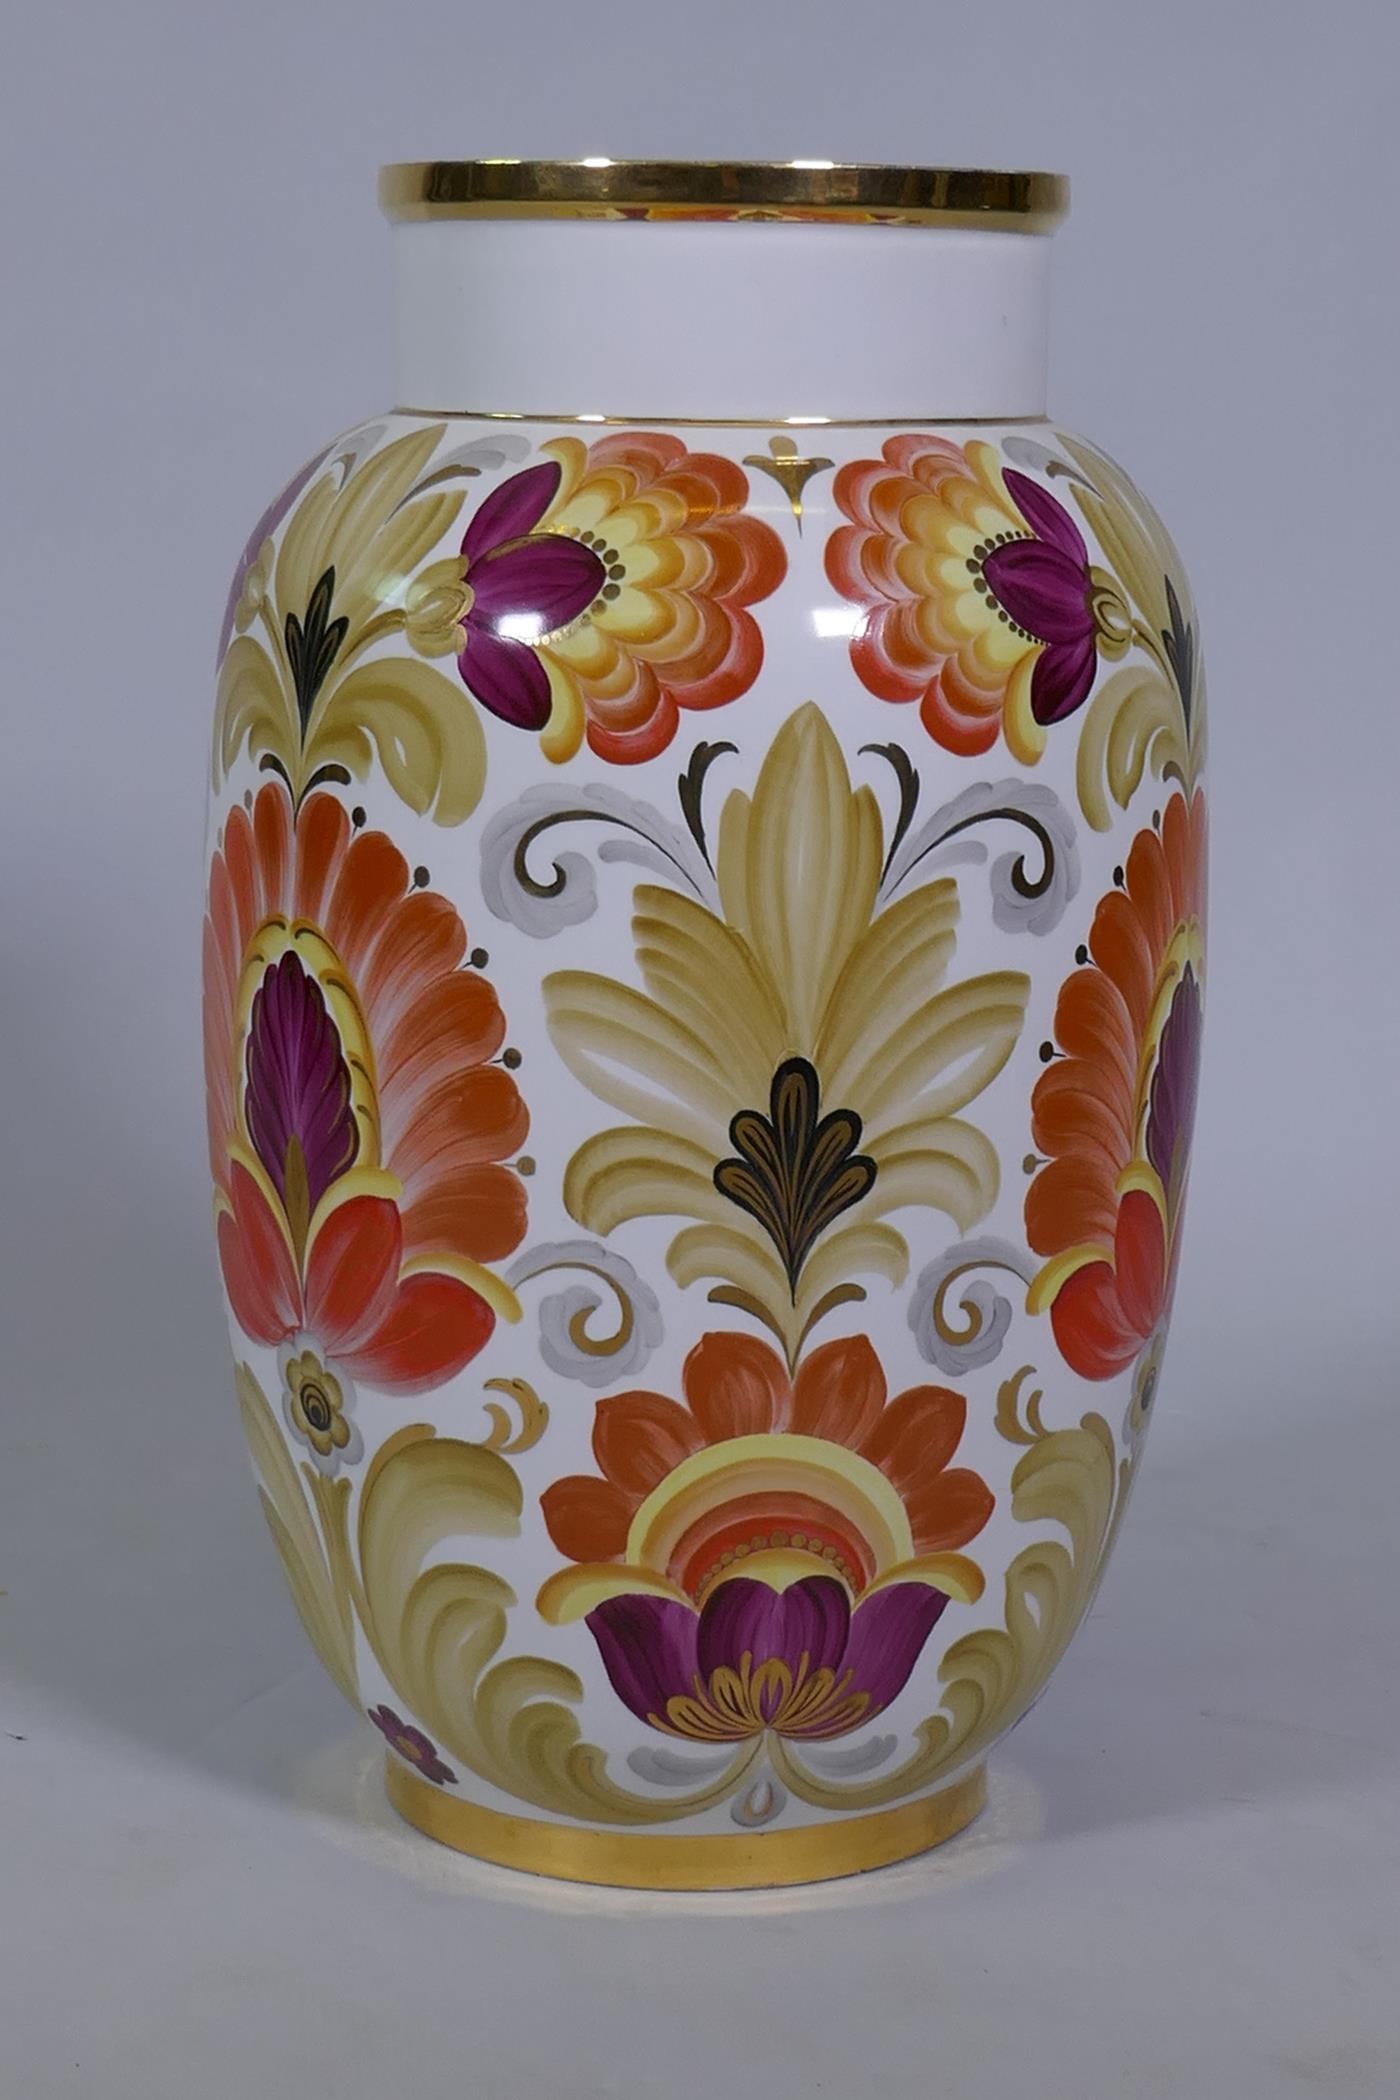 A large Soviet Russian porcelain vase by Lomonsov, with floral decoration and gilt highlights,